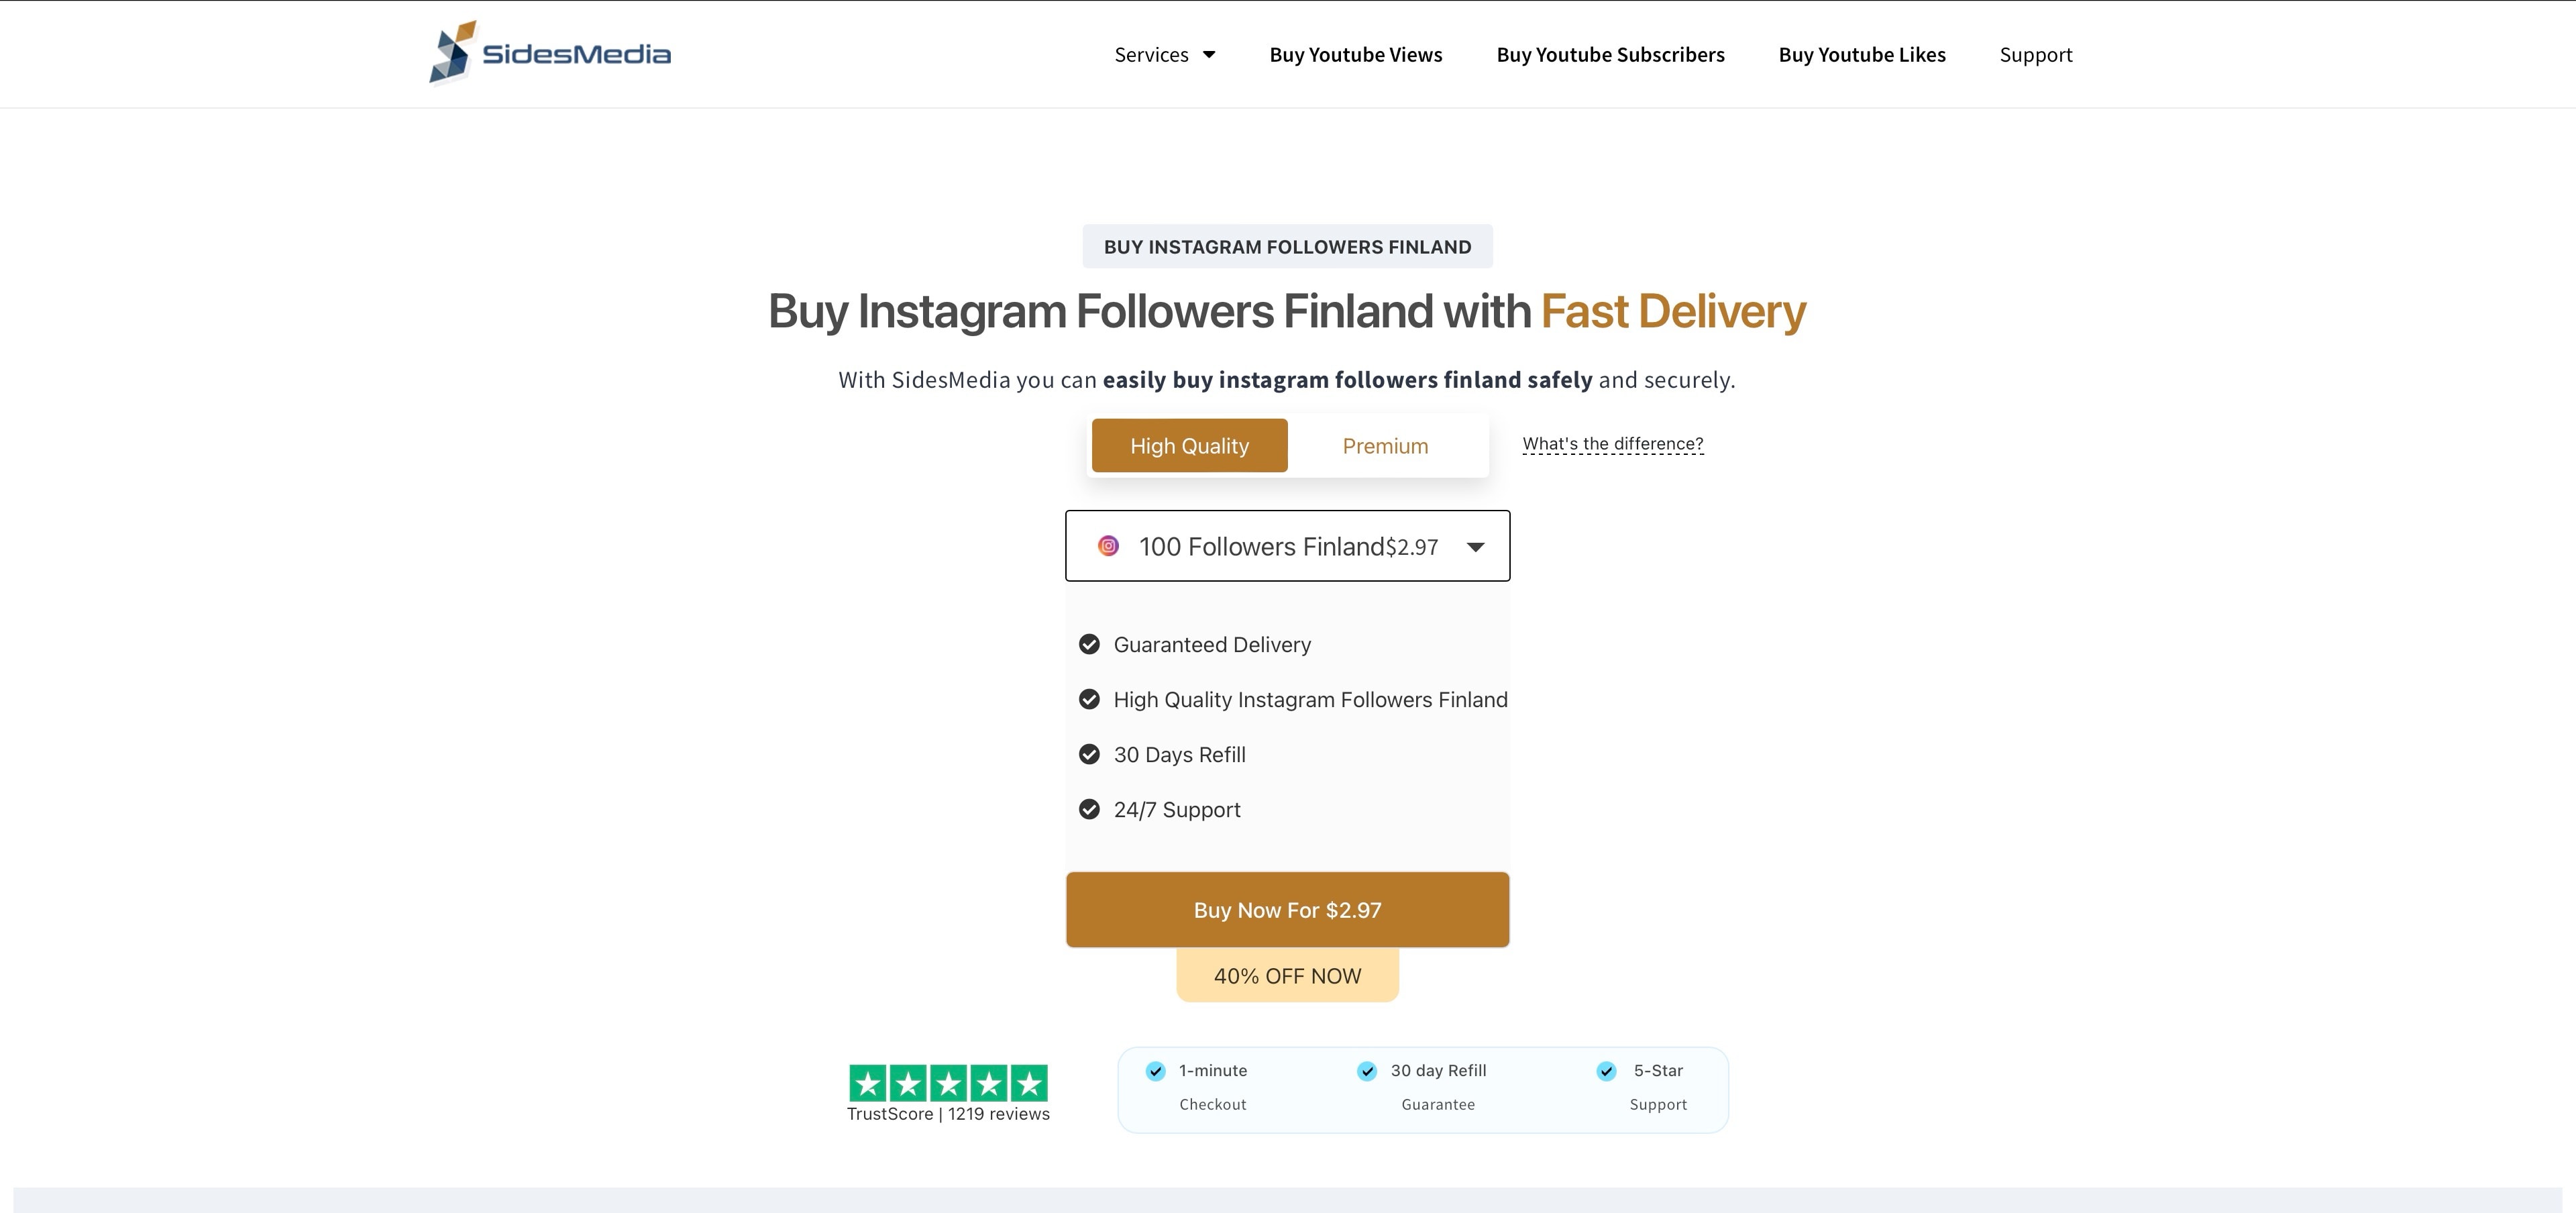 sidesmedia buy instagram followers finland page